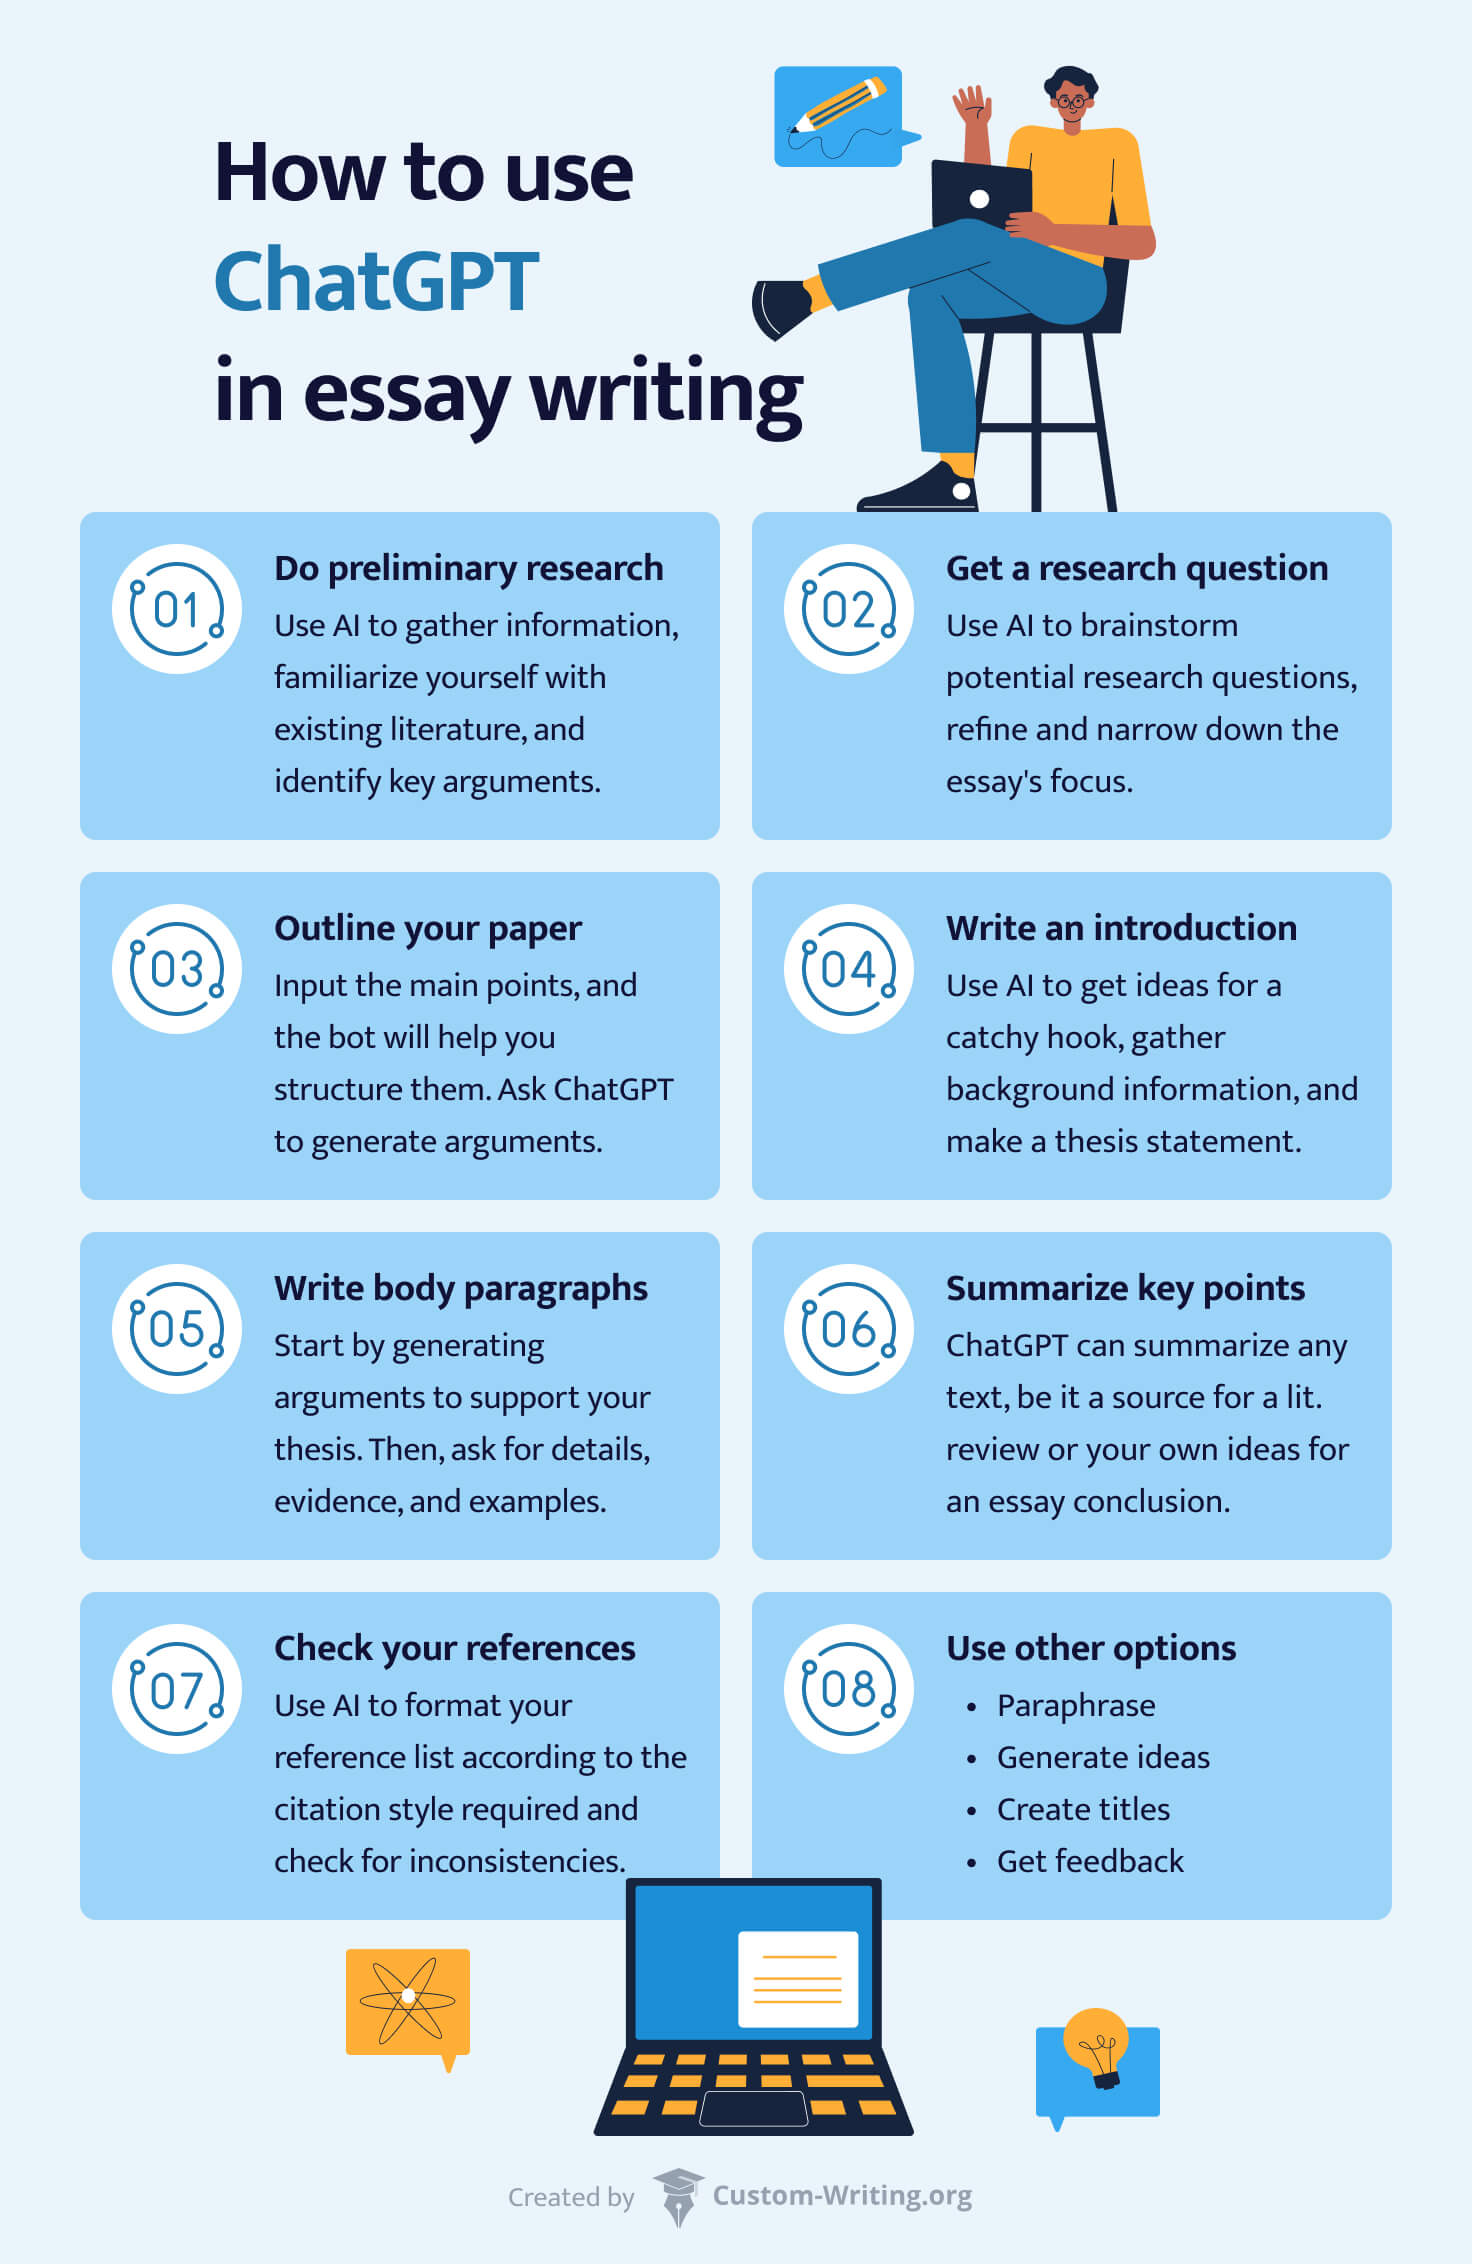 The picture suggests 8 different ways of using ChatGPT in essay writing.